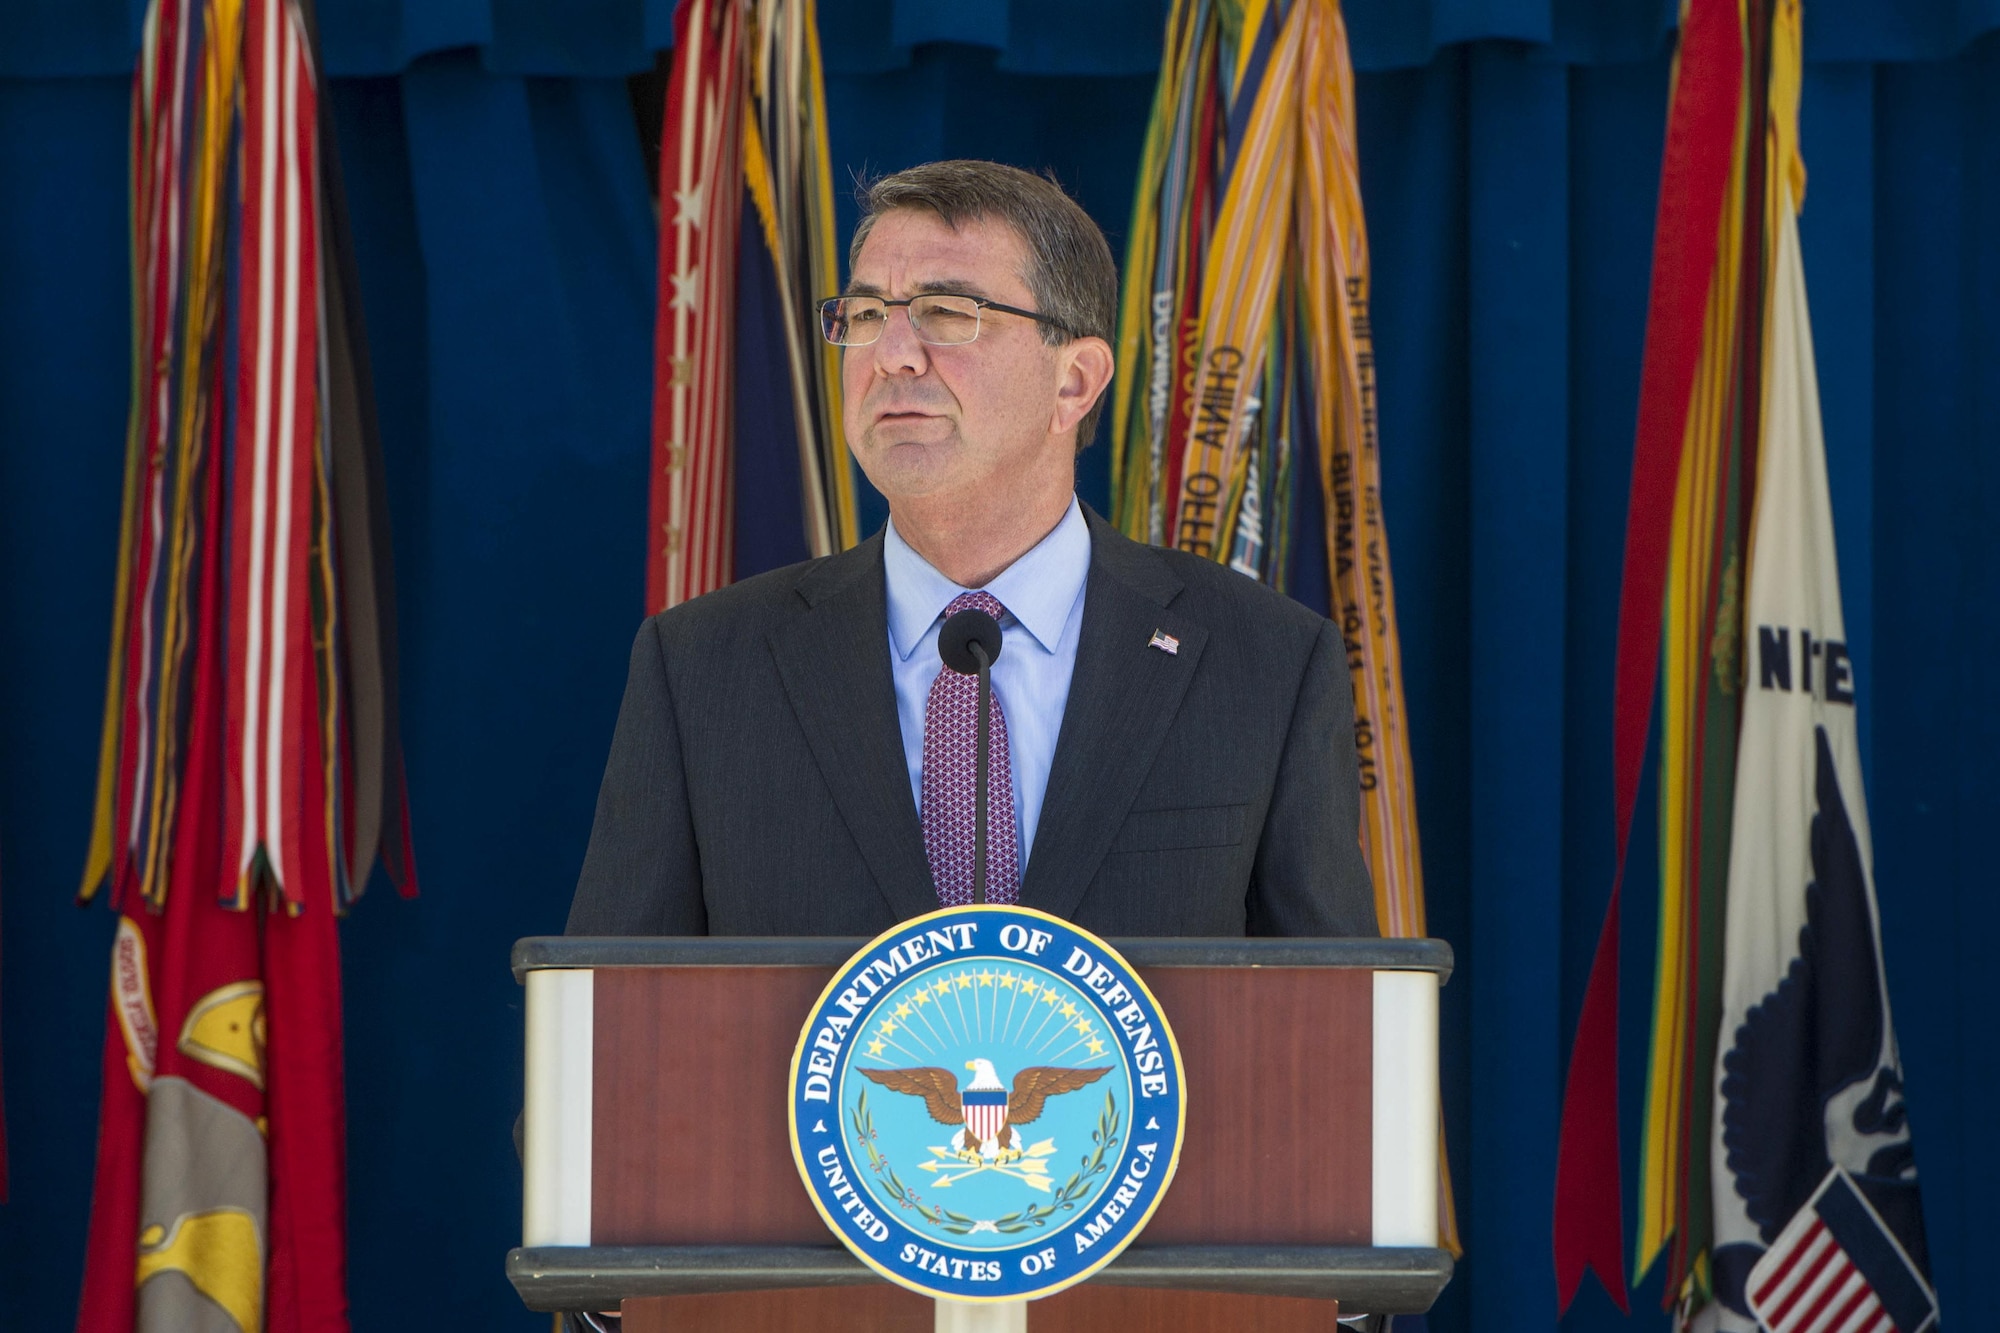 Defense Secretary Ash Carter announces new "Force of the Future" initiatives at the Pentagon, June 9, 2016. DoD photo by Navy Petty Officer 1st Class Tim D. Godbee